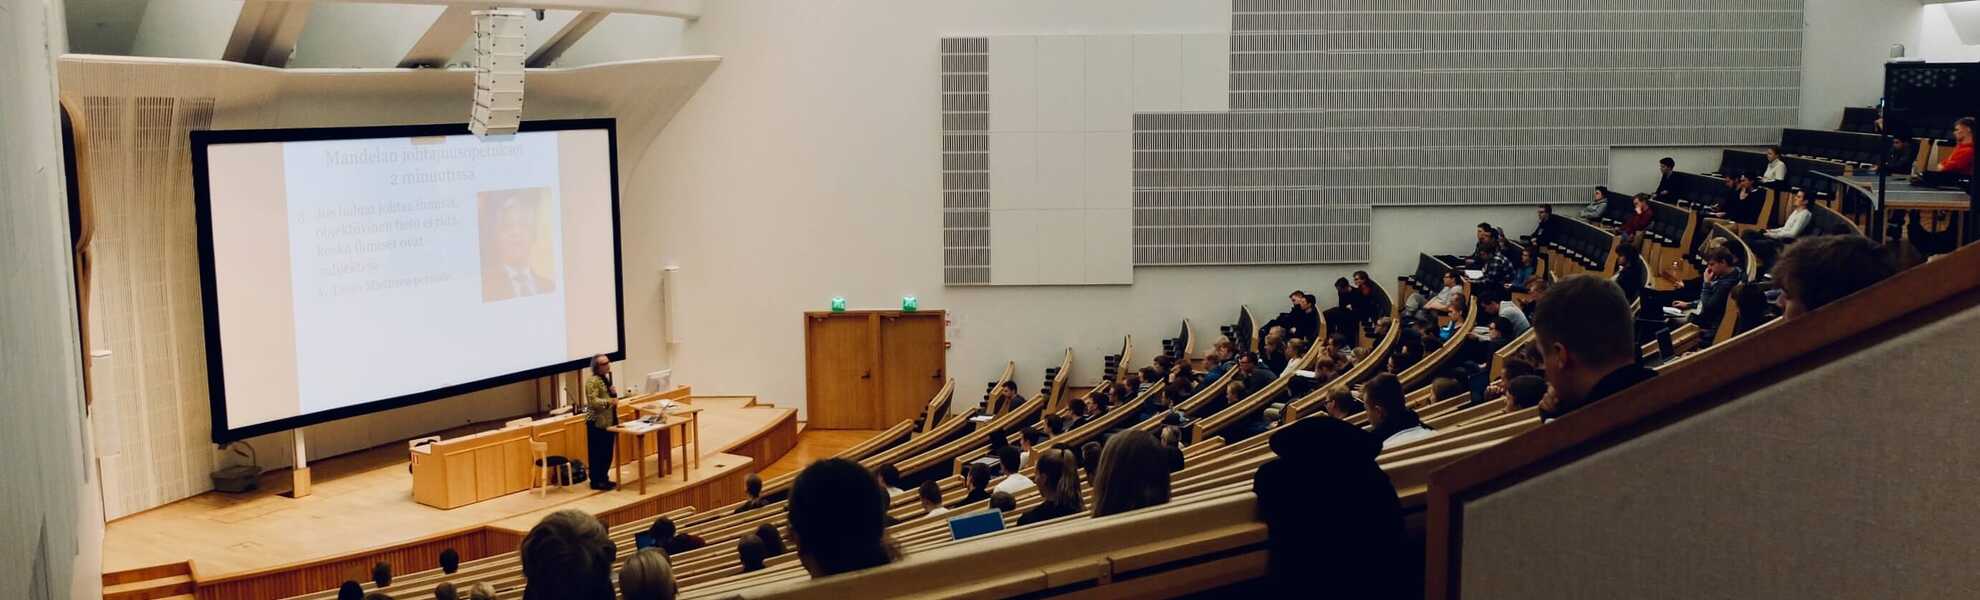 a lecture hall